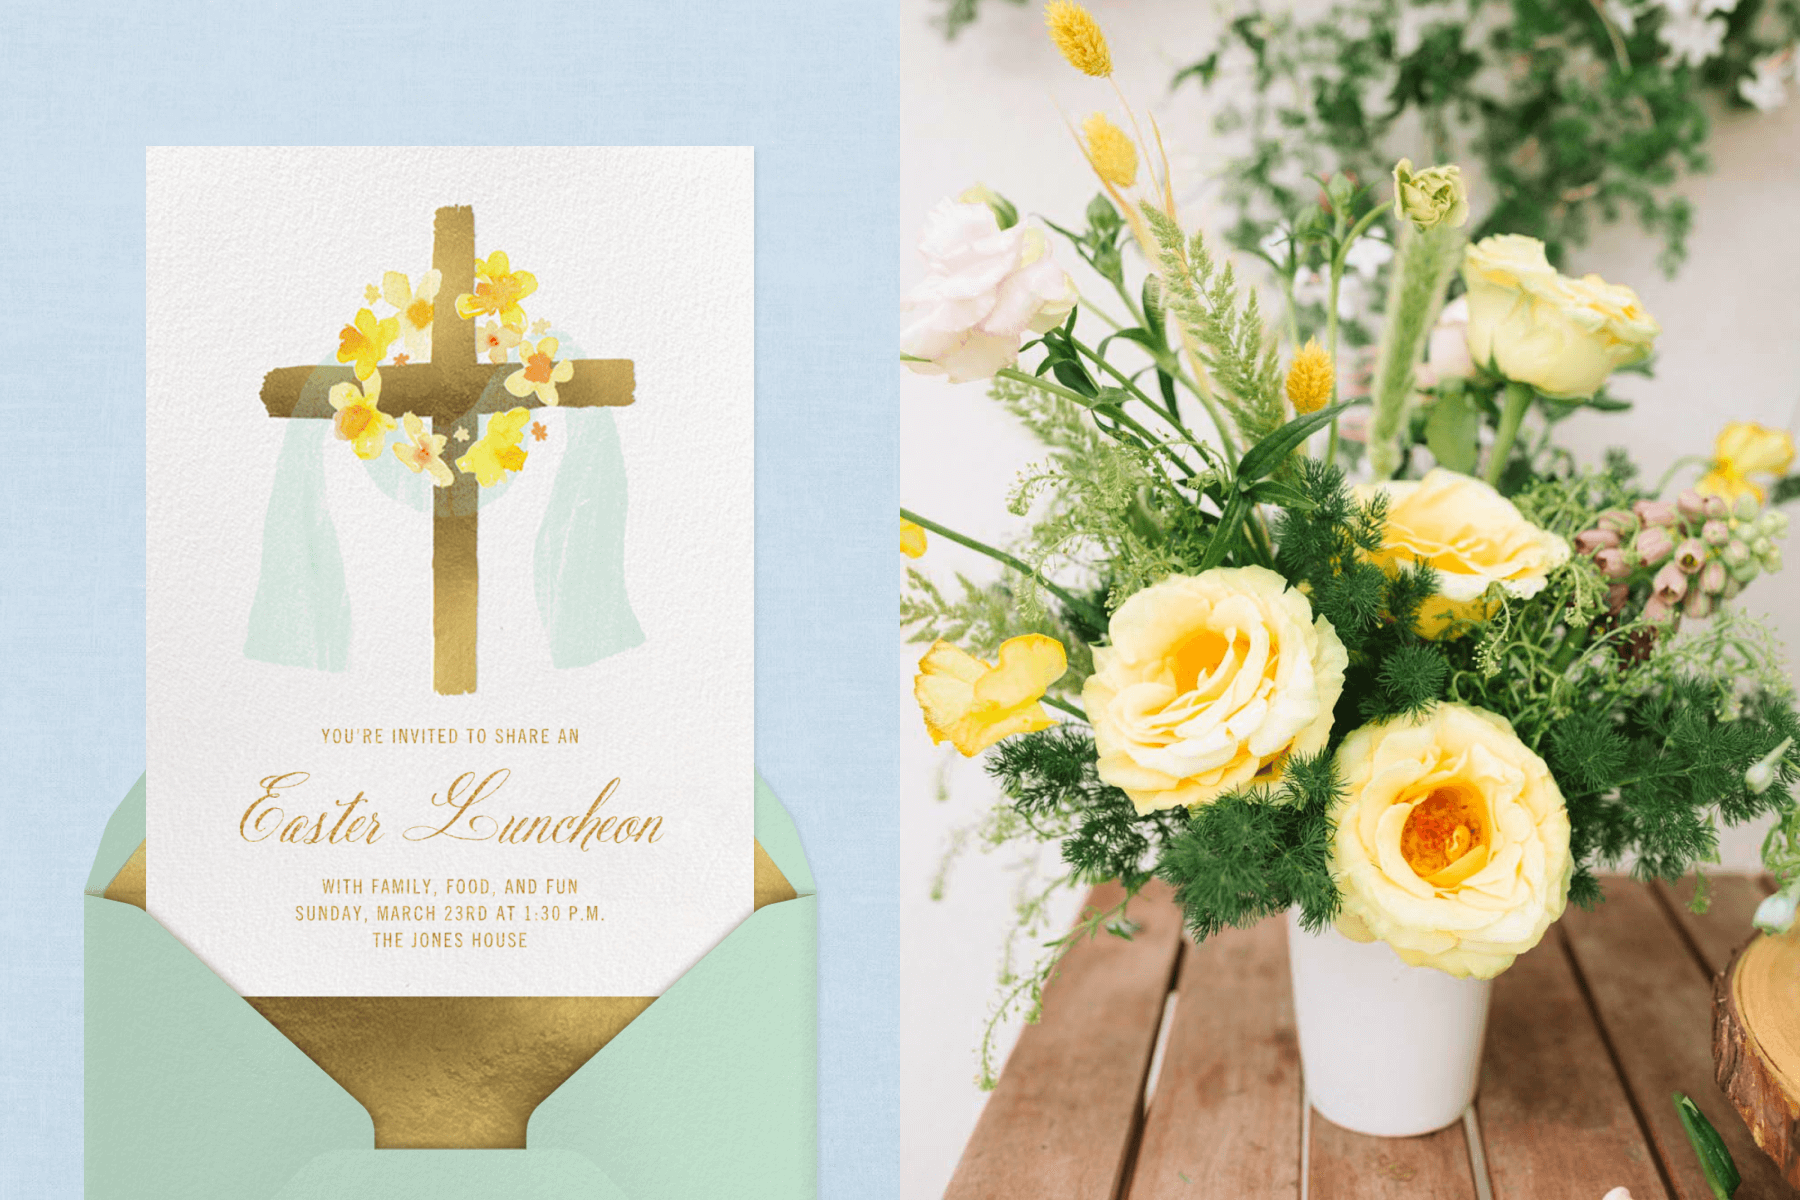 Left: An Easter invitation with an illustration of a cross with wreath; Right: a yellow bouquet.